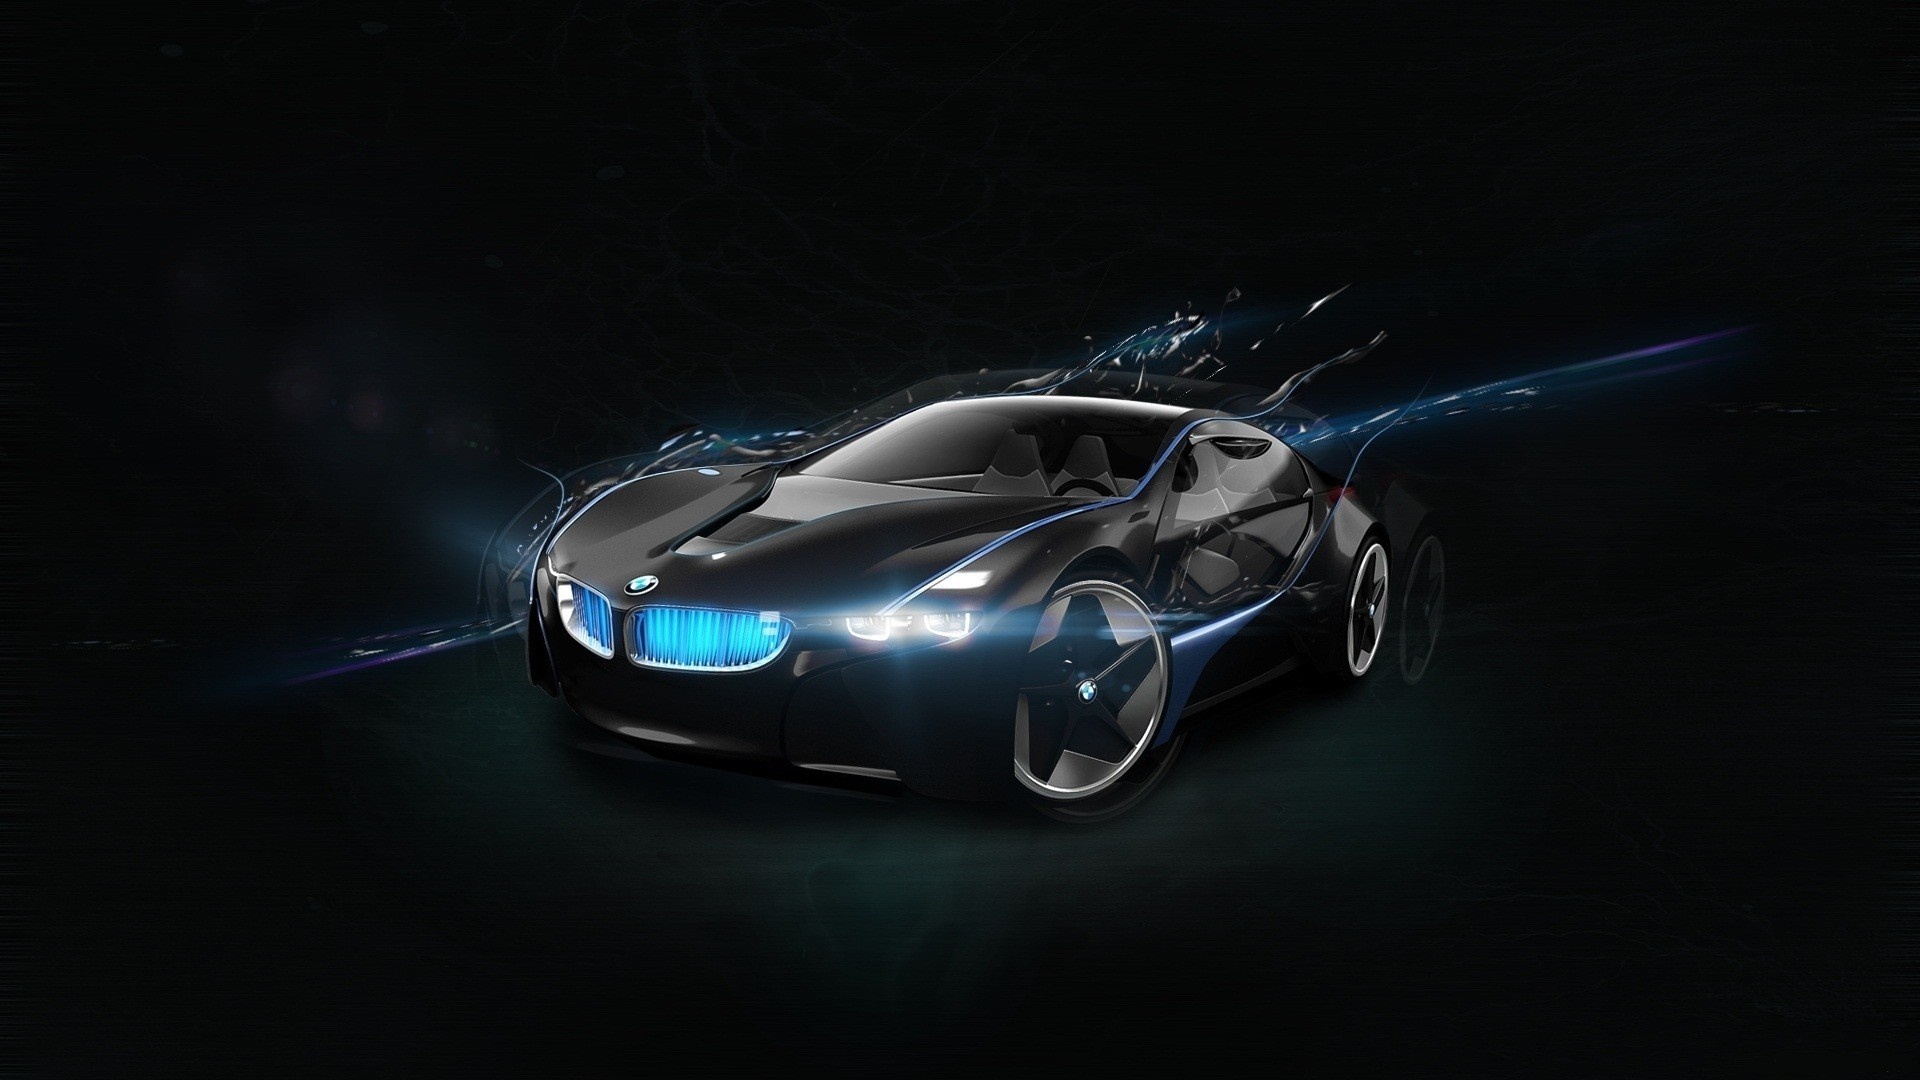 BMW Vision Super Car Wallpapers HD Wallpapers 1920x1080